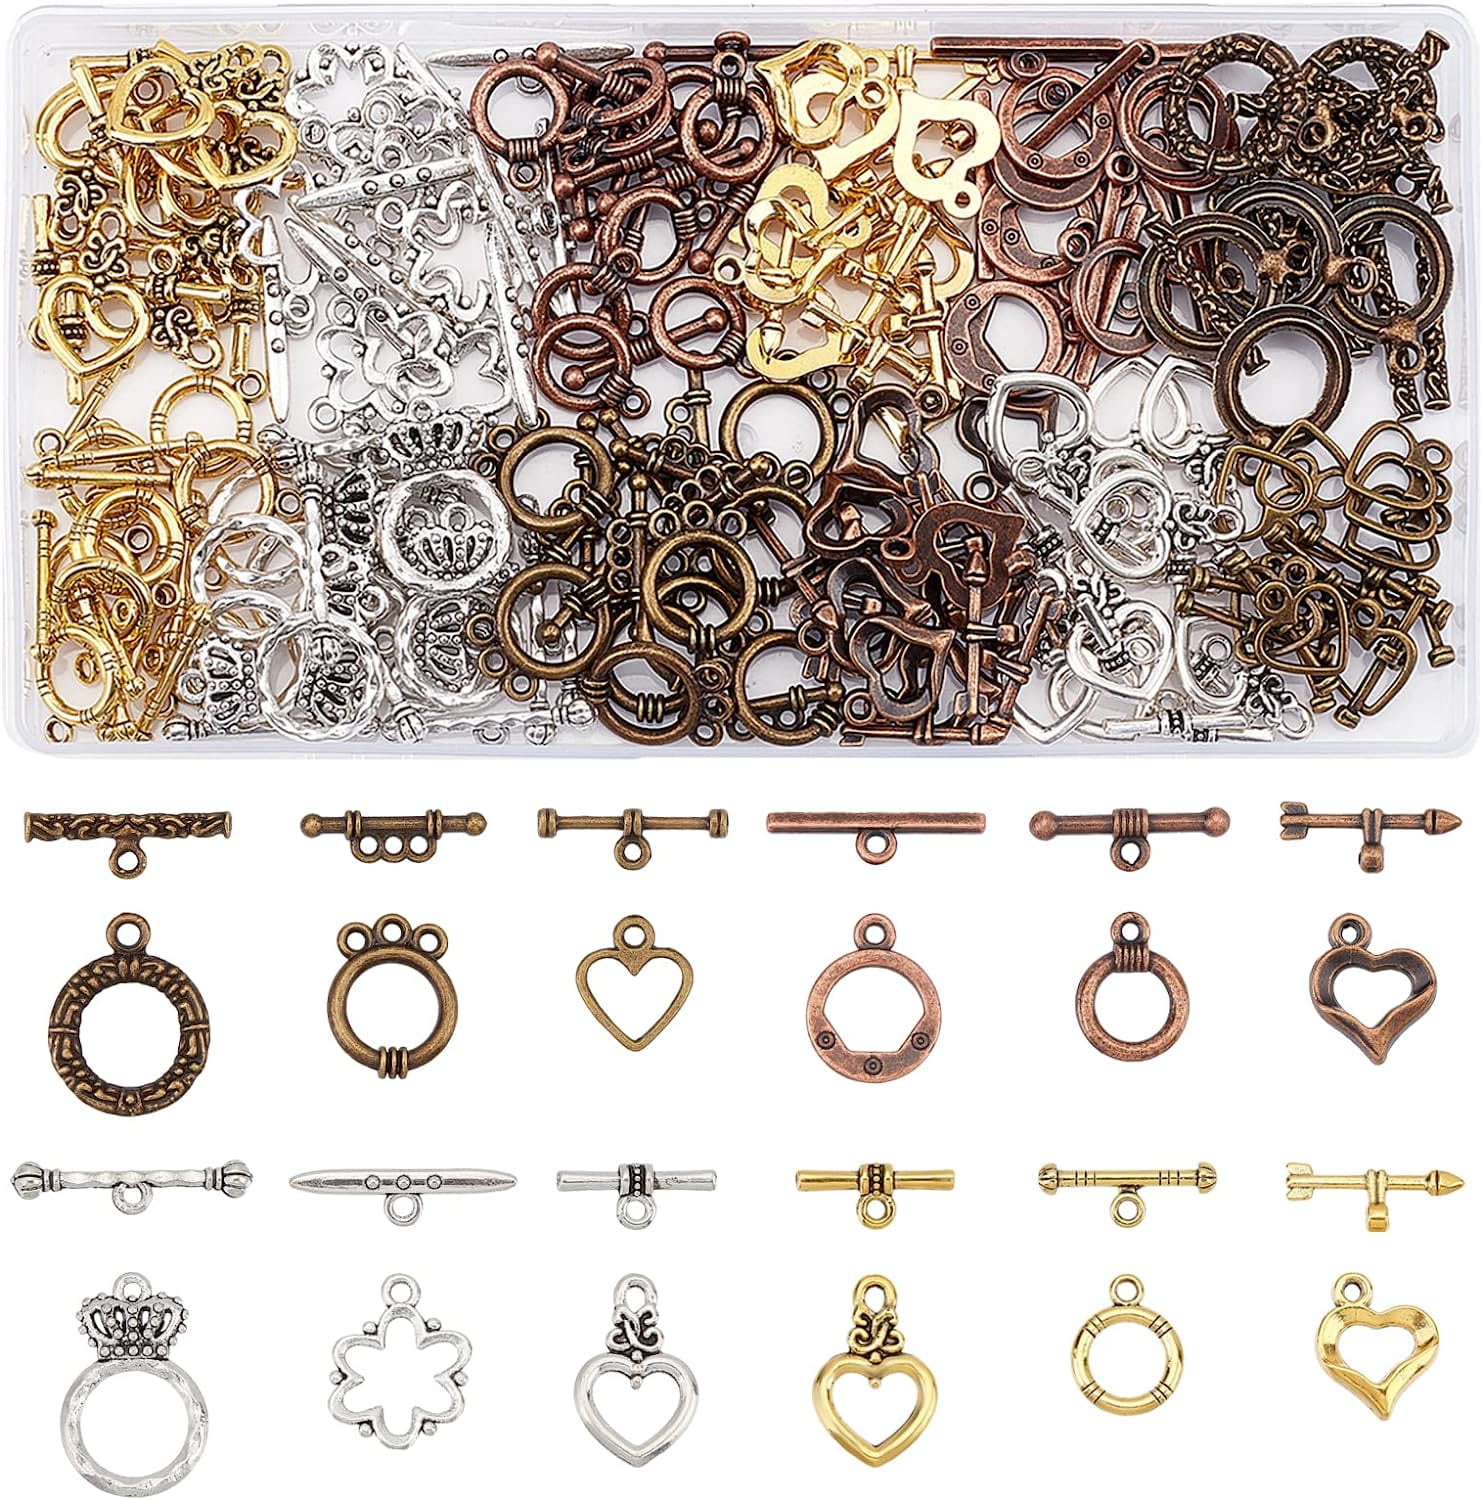  10Sets Tibetan Antique Gold Round Toggle Clasps Connectors Hooks  C100 DIY Crafting by Wholesale Charms